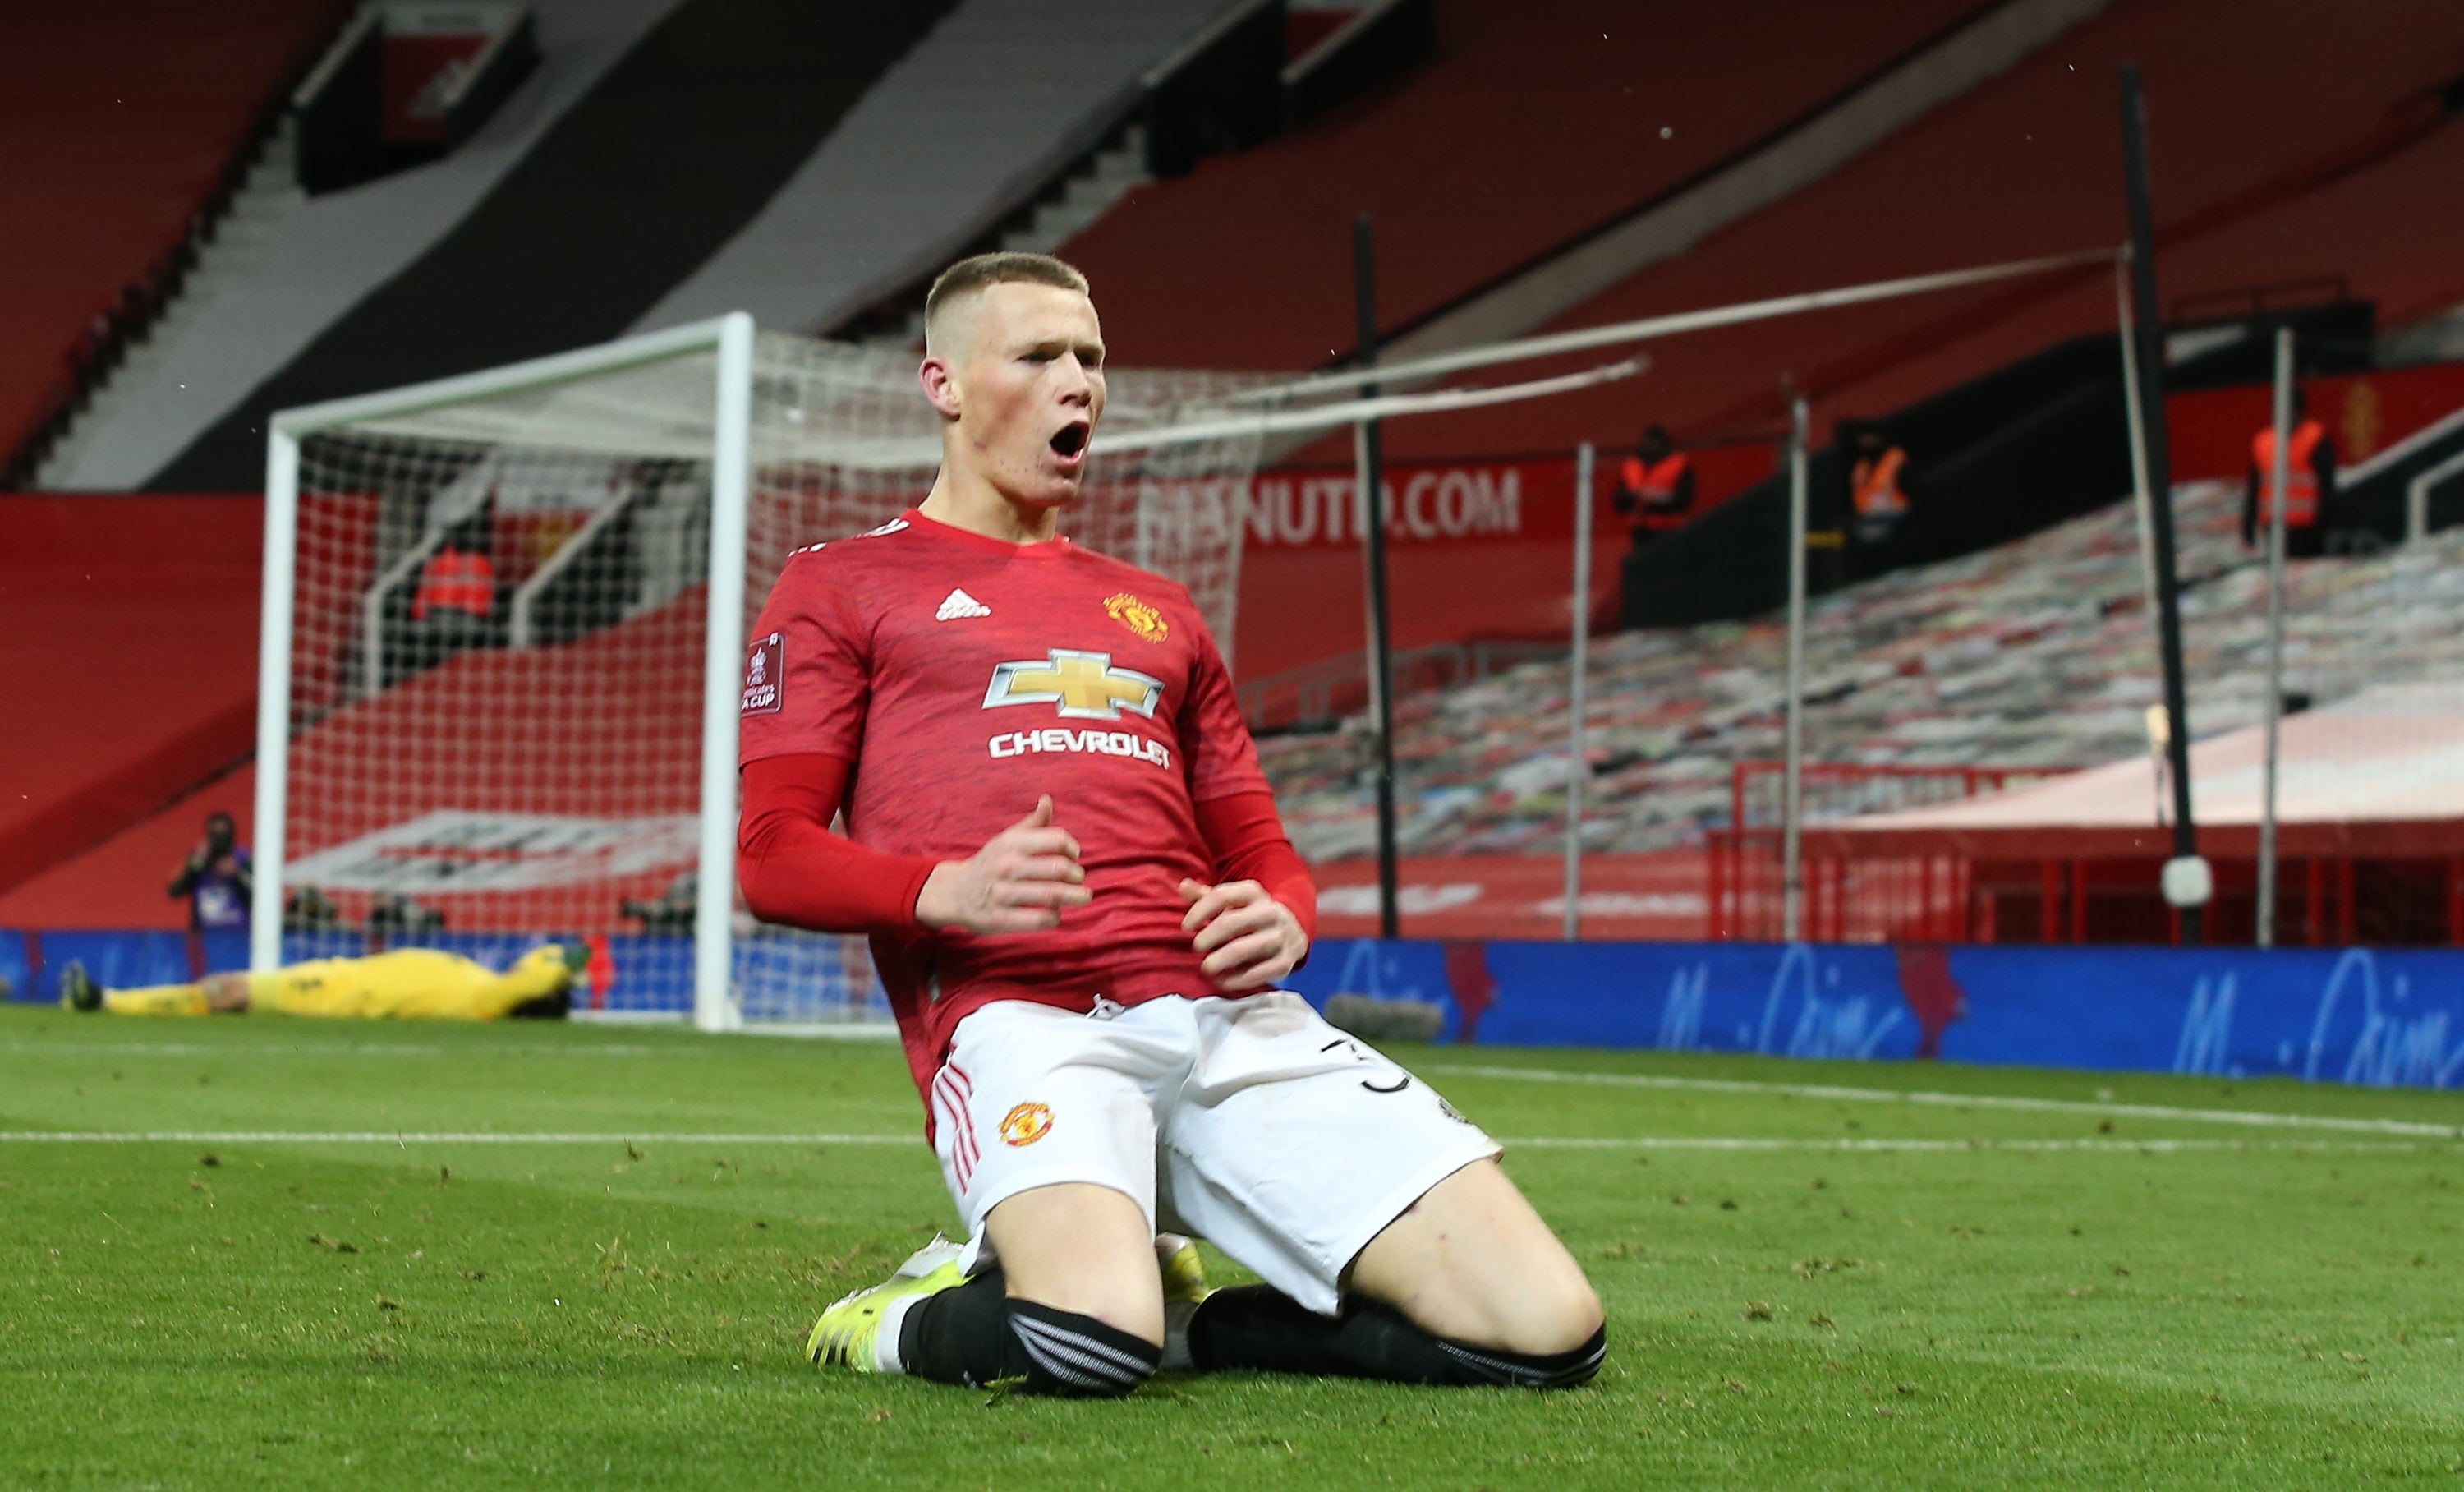 Scott McTominay sent Manchester United through to the quarter-finals